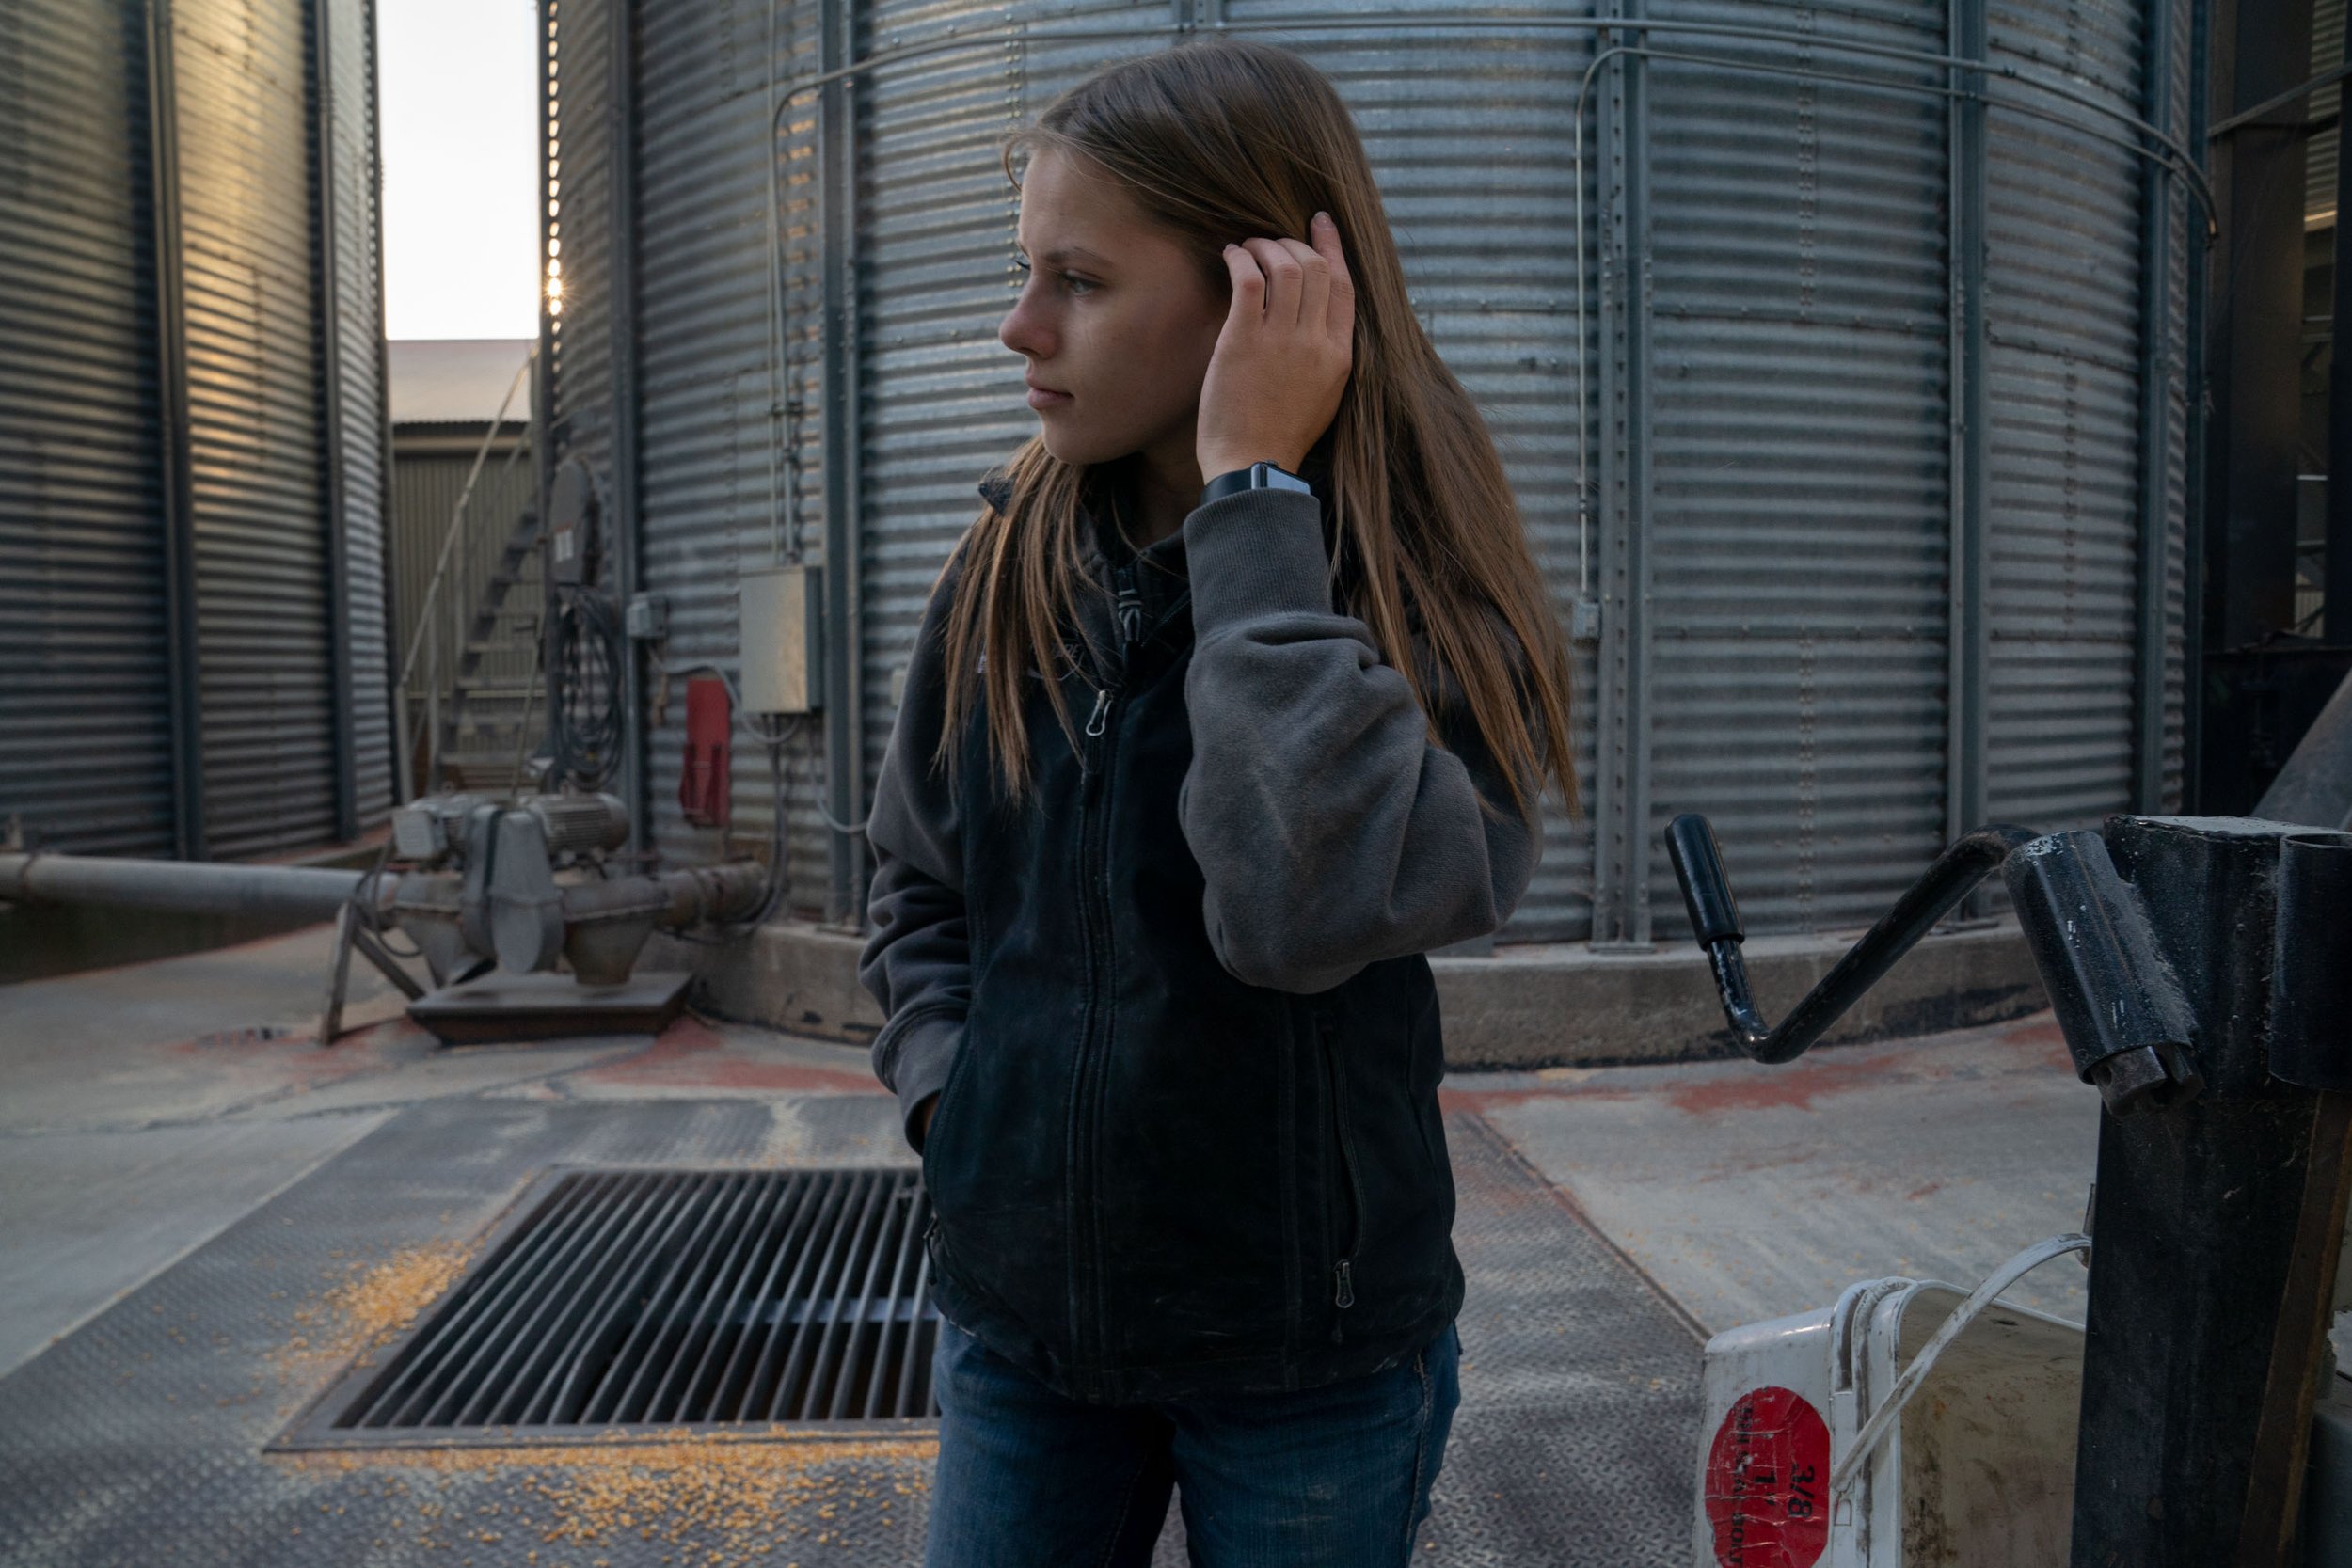  Jaime Johnson, 16, works after school at the Johnson Family Farm Oct. 19, 2022 in Evansville, Minn. Johnson also is a part of her high school’s Future Farmers of America. She grew up on her family farm and hopes to one day take over the property. “I